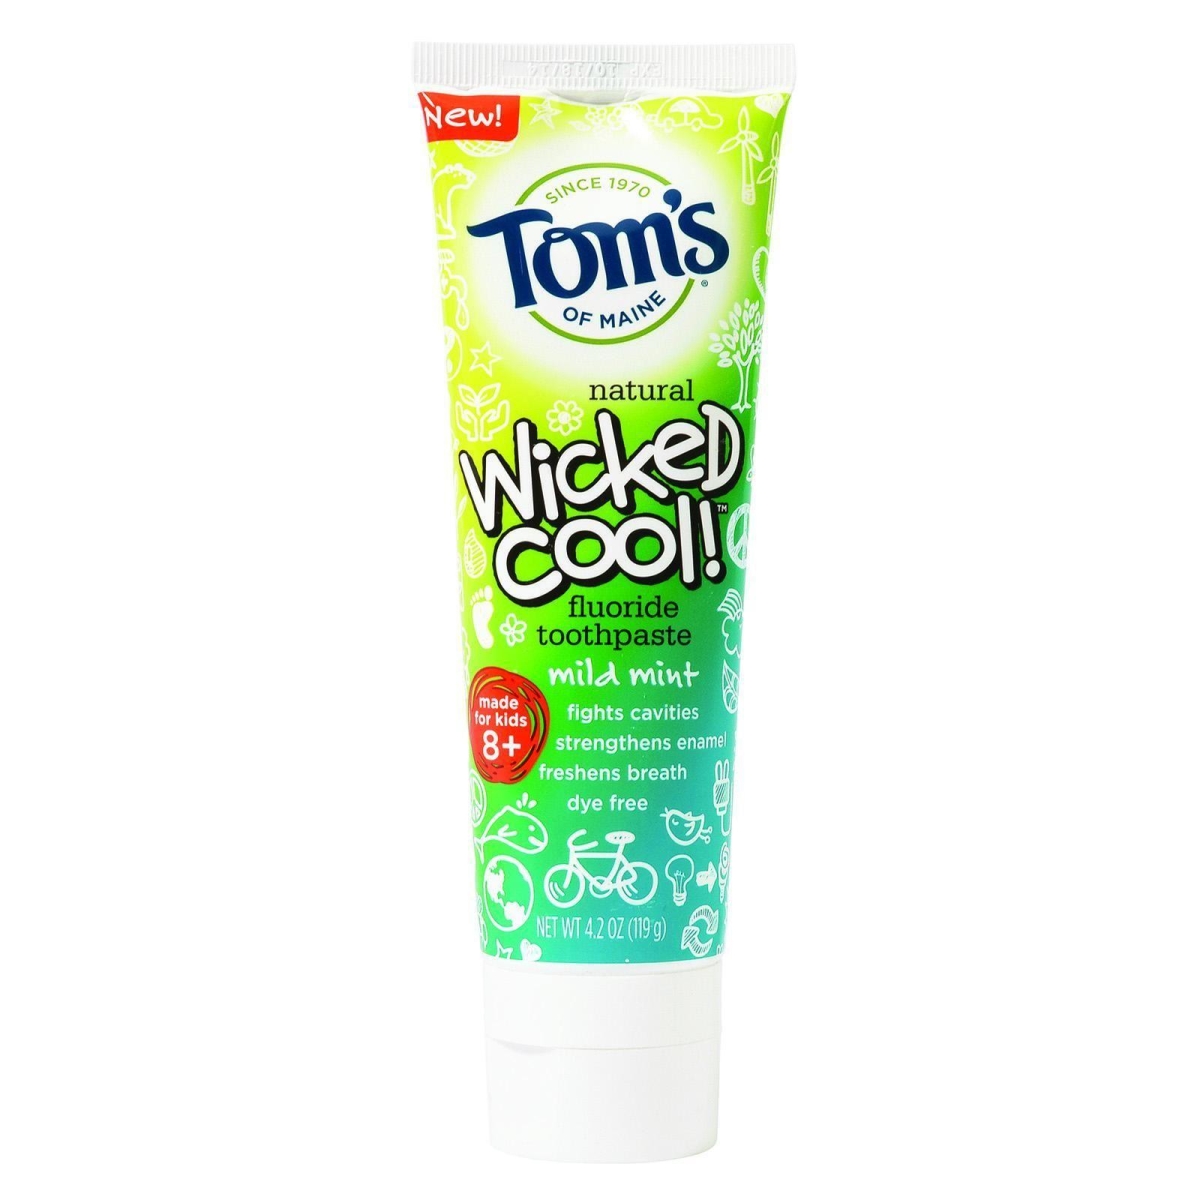 Toms Of Maine Hg1187608 4.2 Oz Toothpaste Wicked Cool Flouride Kids, Mild Mint - Case Of 6